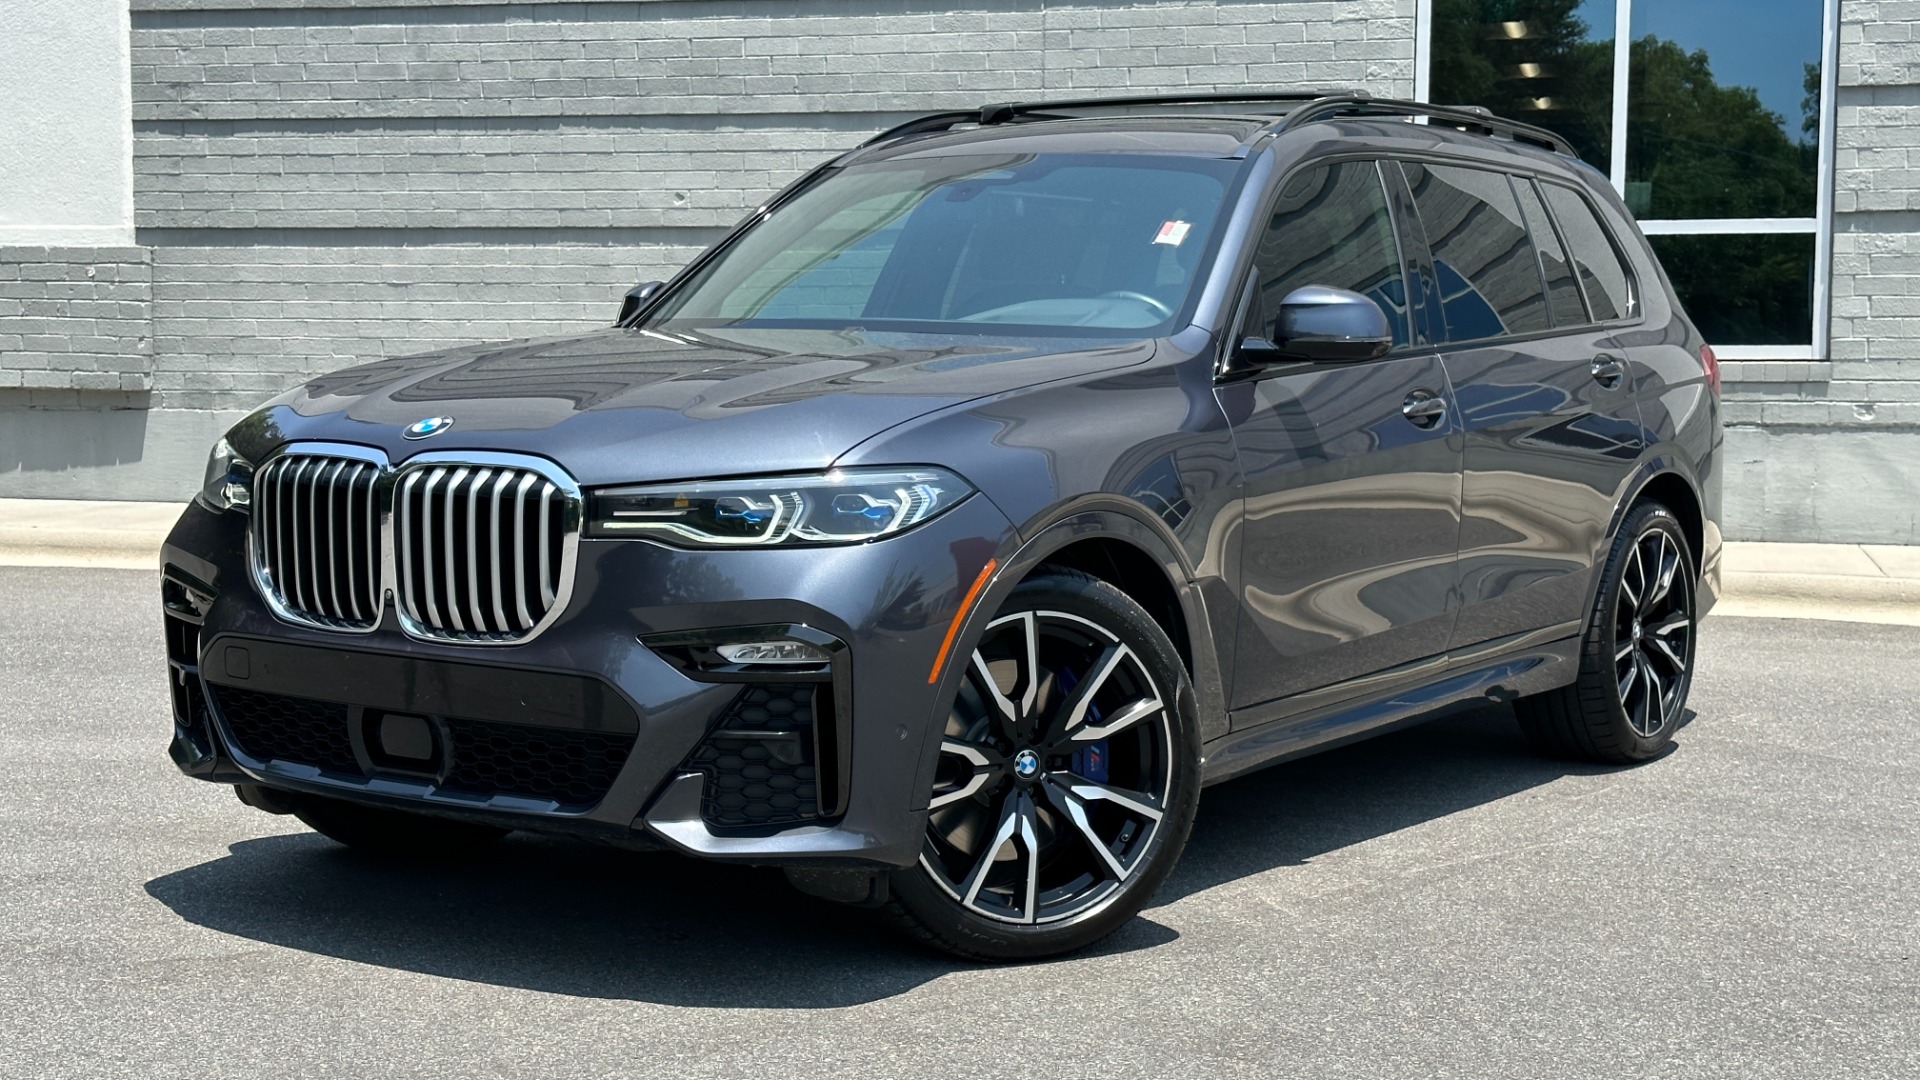 Used 2019 BMW X7 xDrive50i / EXECUTIVE / M SPORT / EXECUTIVE / DYNAMIC HANDLING / LEATHER for sale $53,800 at Formula Imports in Charlotte NC 28227 1